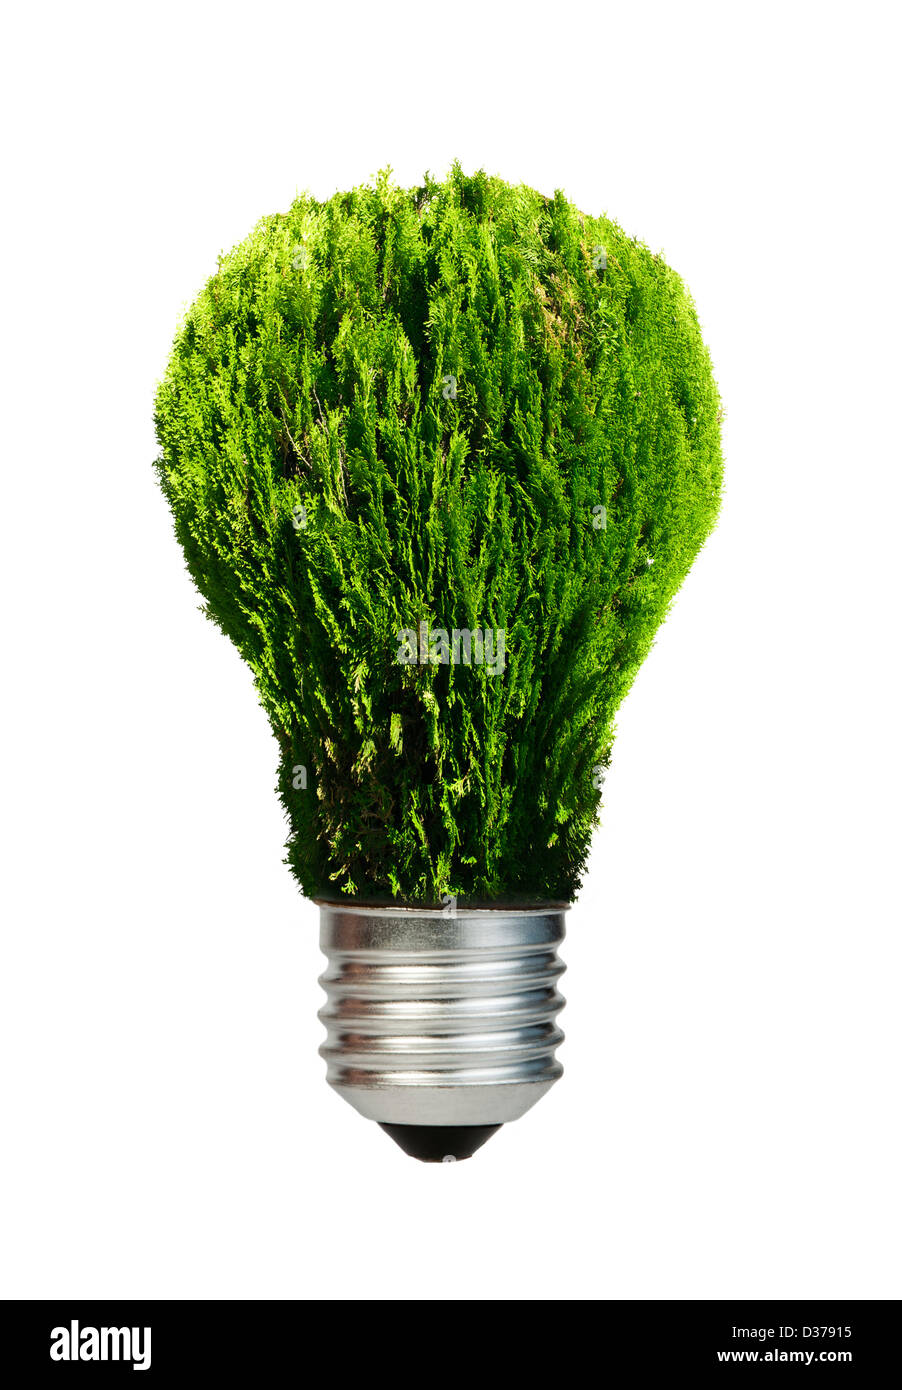 Lamp made of green plants. Ecology conception. Blue sky. Stock Photo